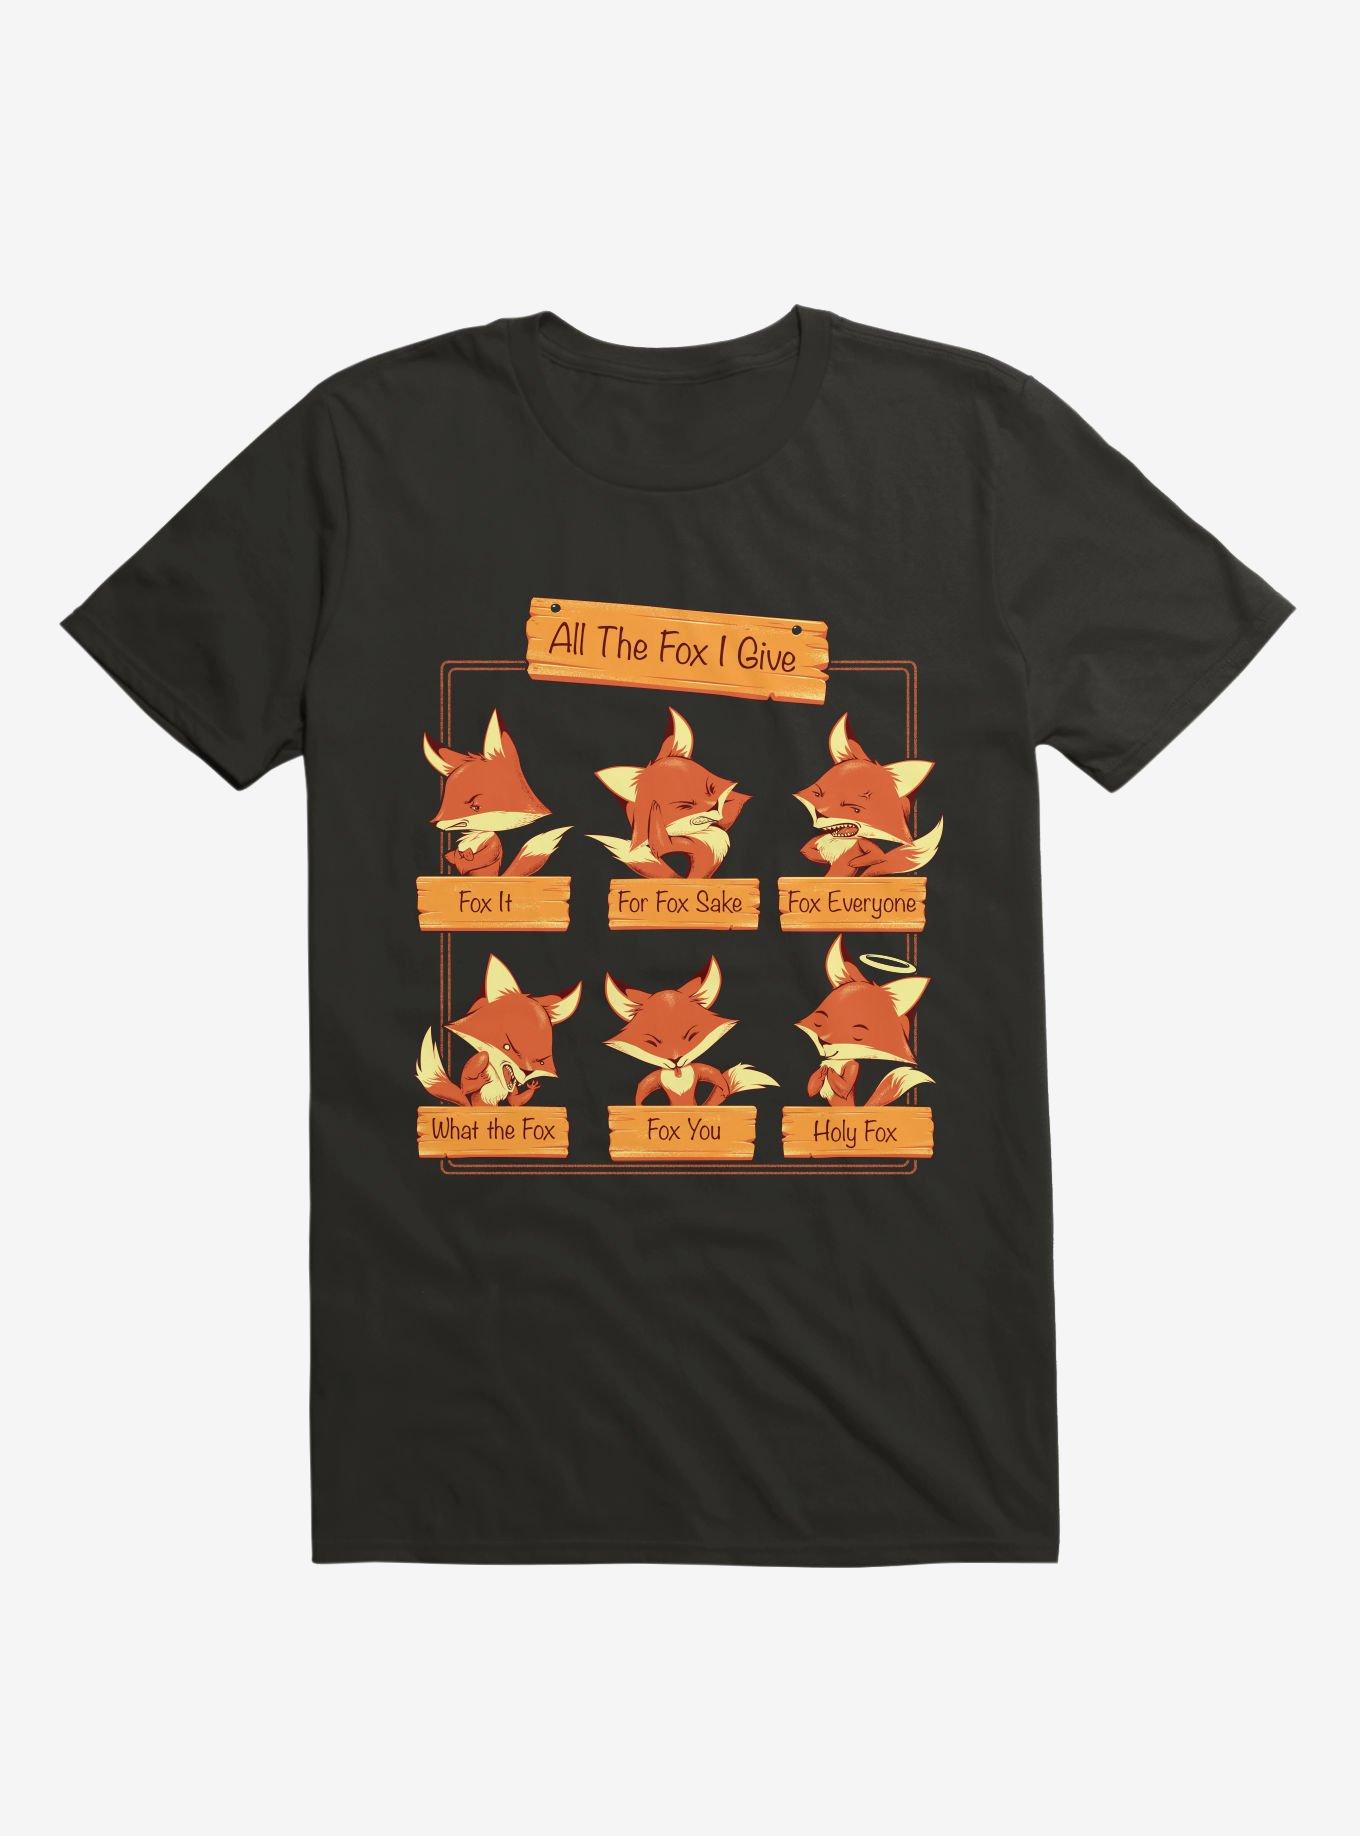 All The Fox I Give Black T-Shirt